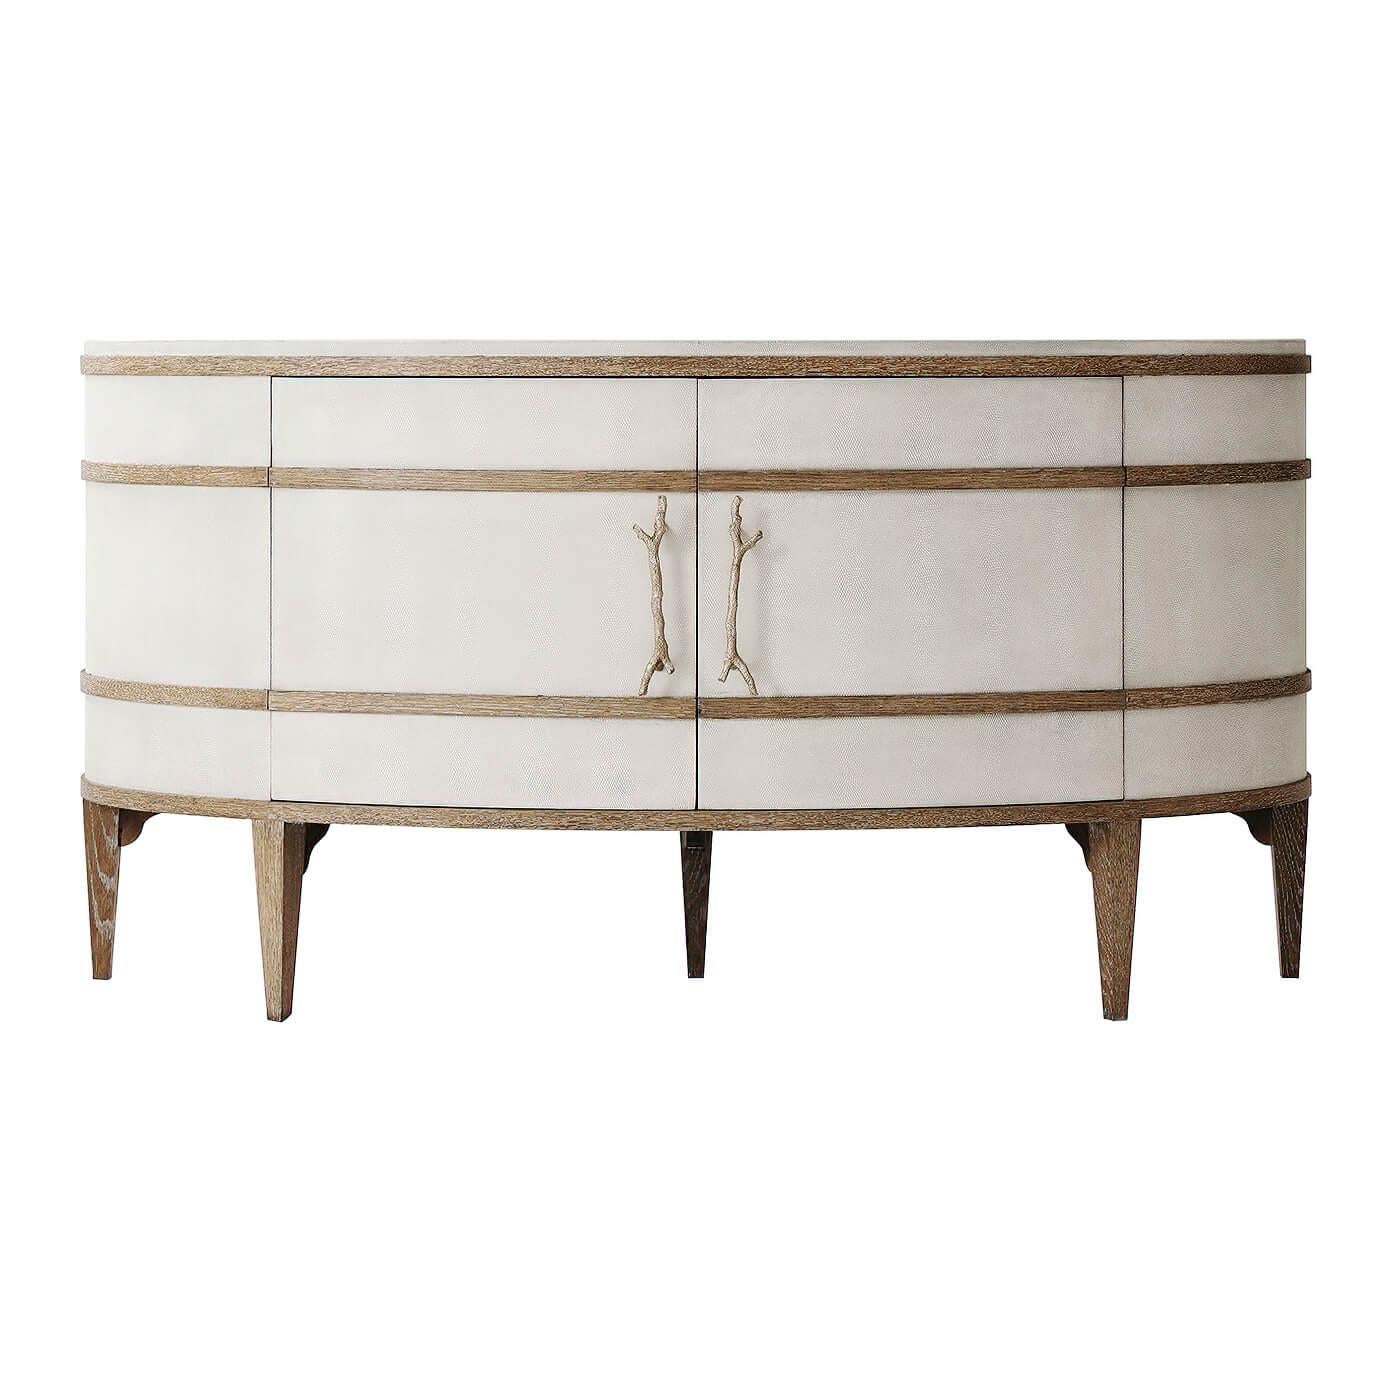 Modern embossed leather panelled demi lune sideboard cabinet with figured Ofram veneers and solid Oak moldings in a cerused finish. The two door cabinet with champagne finished textured coral cast brass handles and the interior having adjustable